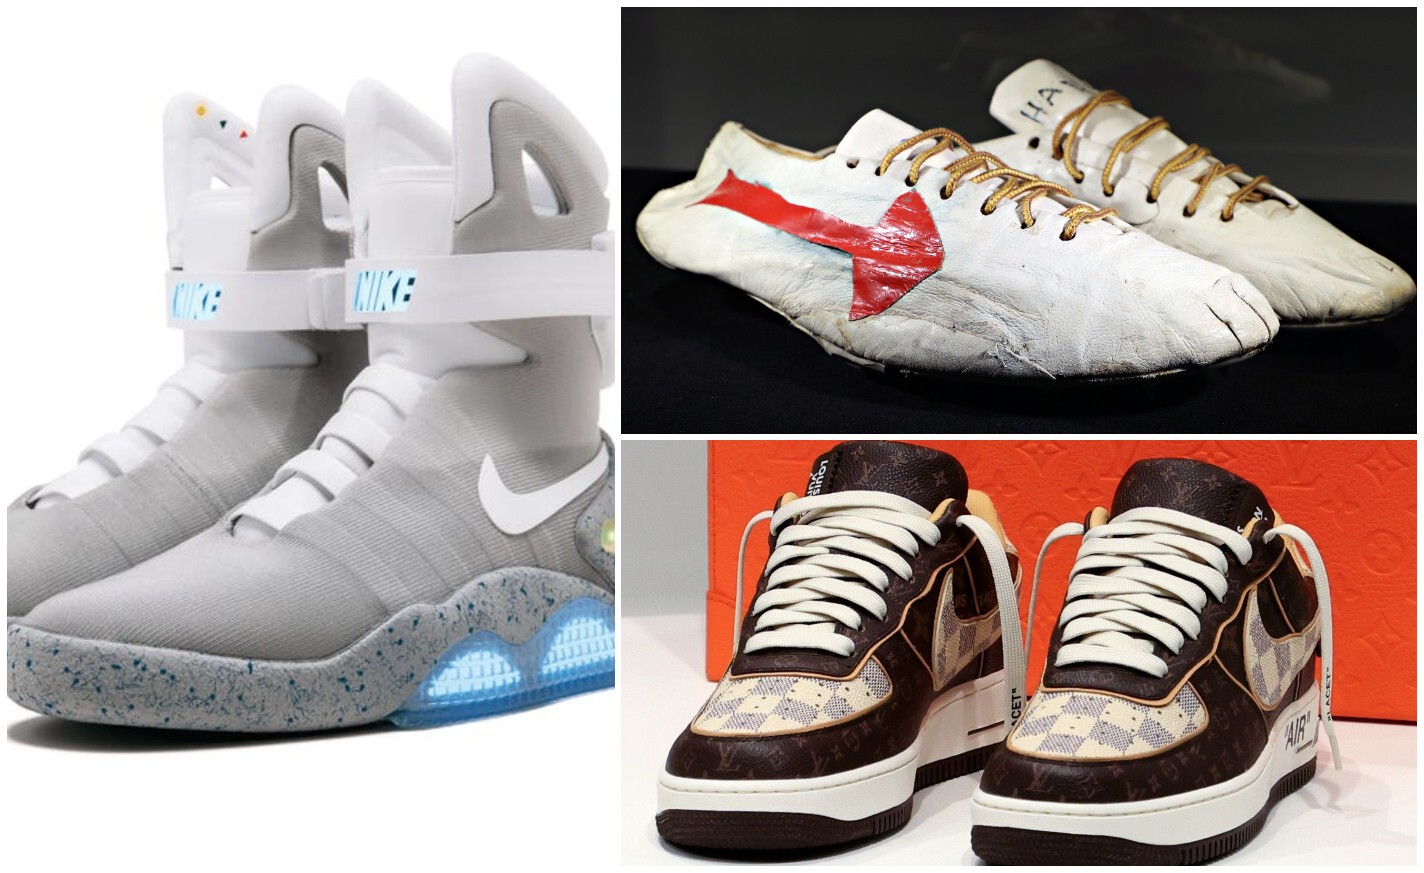 what's the most expensive pair of sneakers